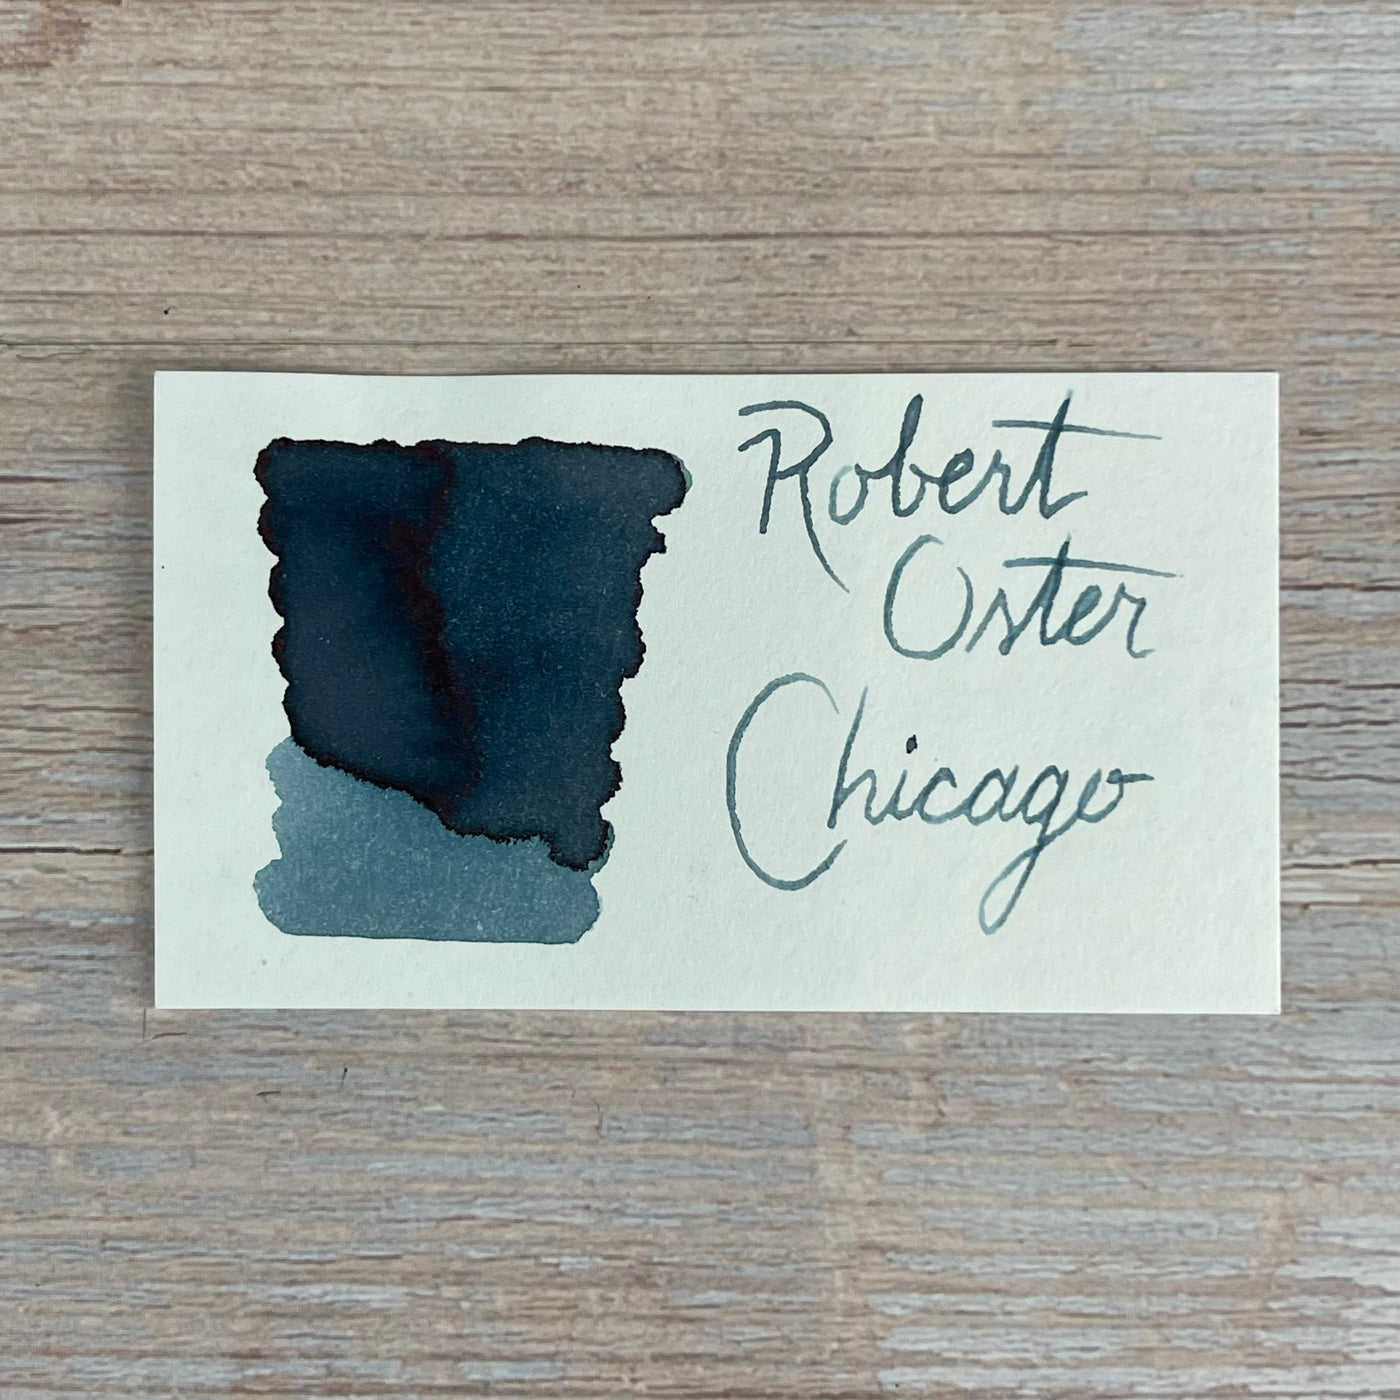 Robert Oster Cities of America Chicago - 50ml Bottled Ink